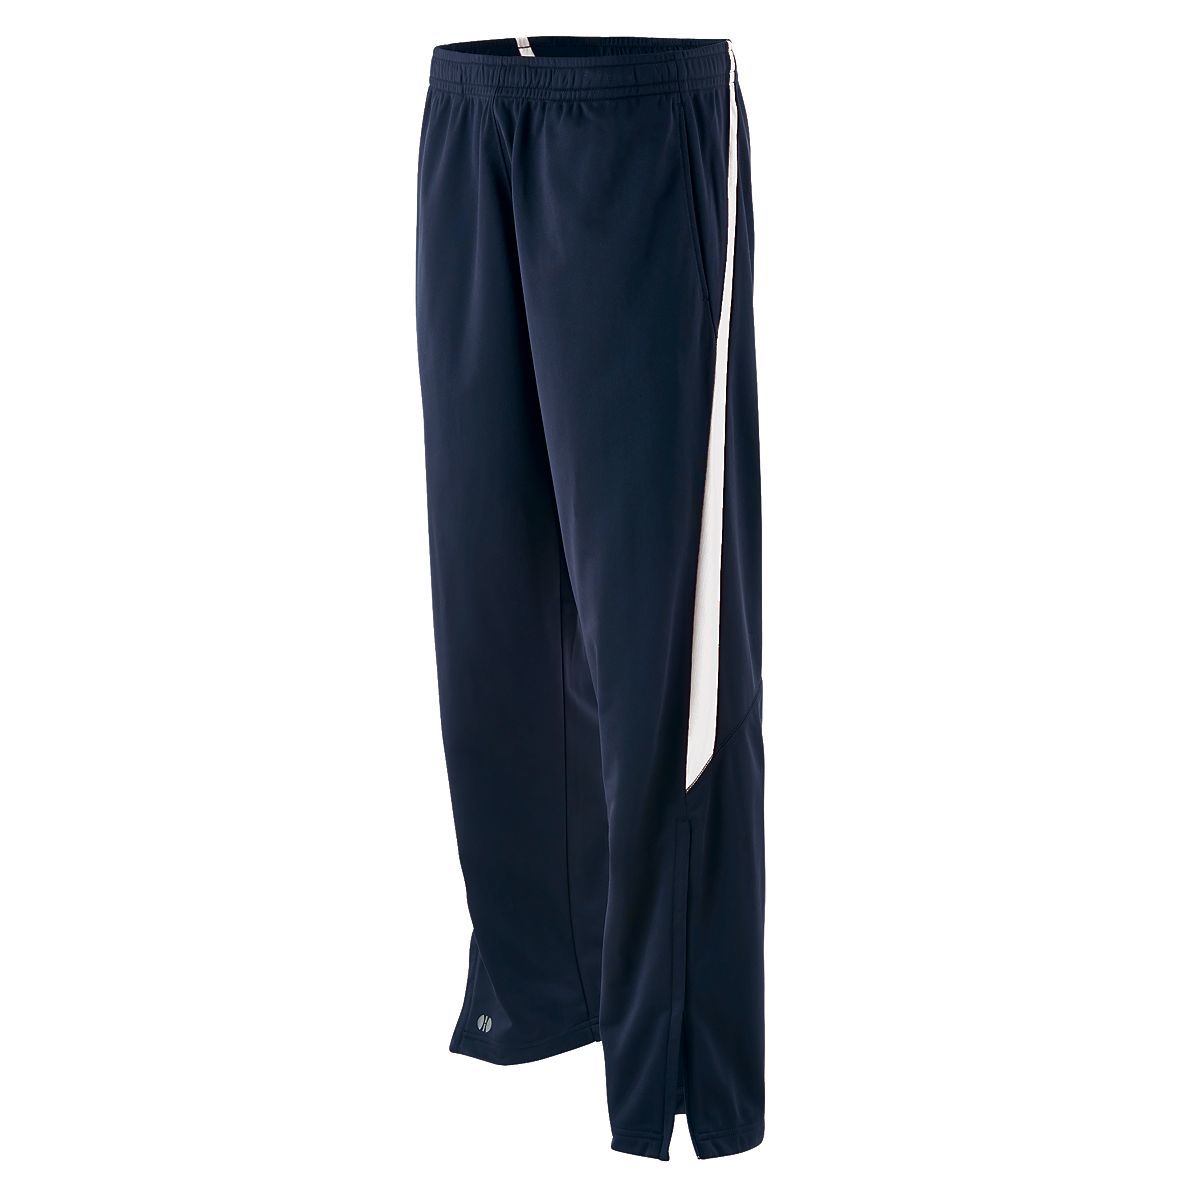 Holloway Determination Pant in Navy/White  -Part of the Adult, Adult-Pants, Pants, Holloway product lines at KanaleyCreations.com